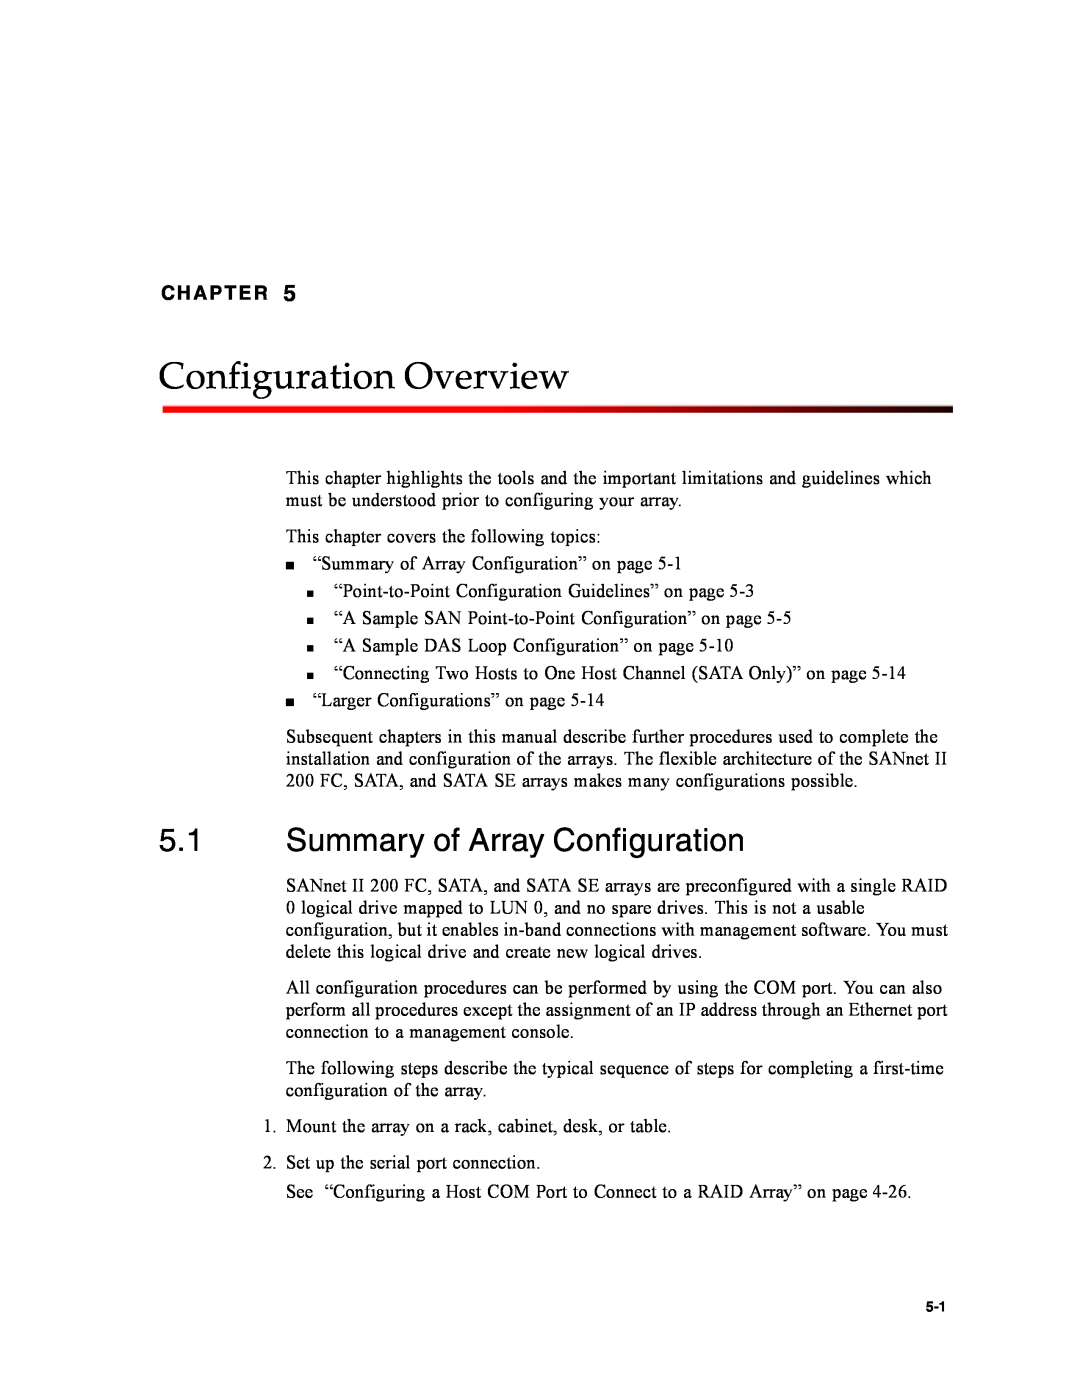 Dot Hill Systems II 200 FC service manual Configuration Overview, Summary of Array Configuration, Chapter 